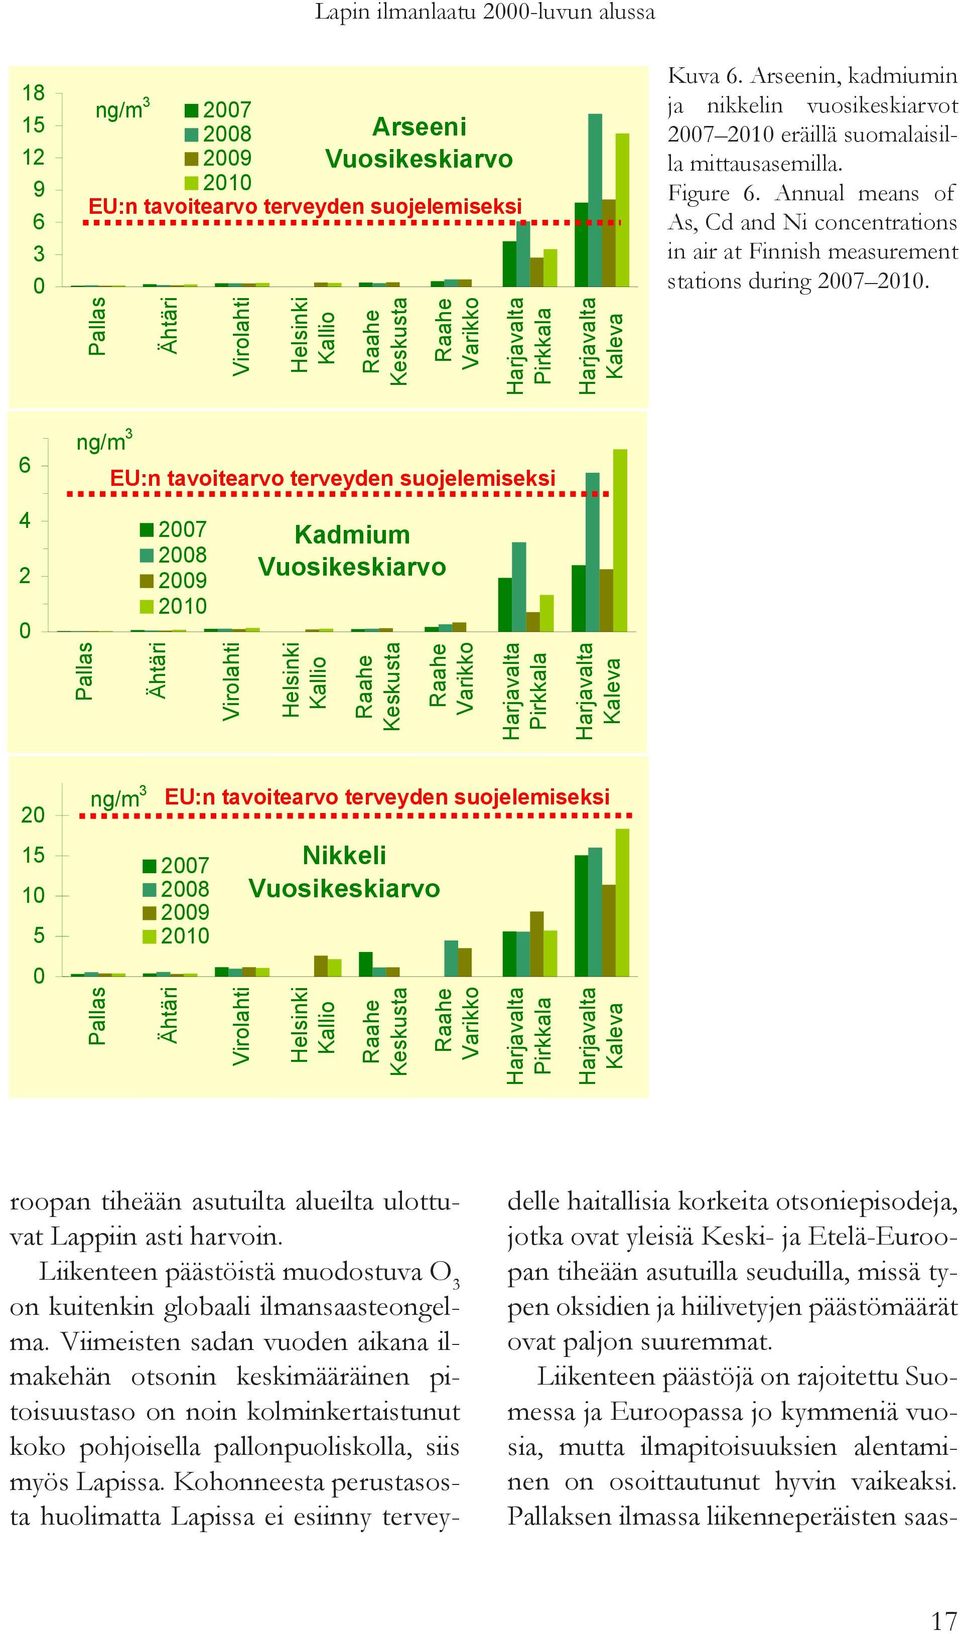 Annual means of As, Cd and Ni concentrations in air at Finnish measurement stations during 2007 2010.